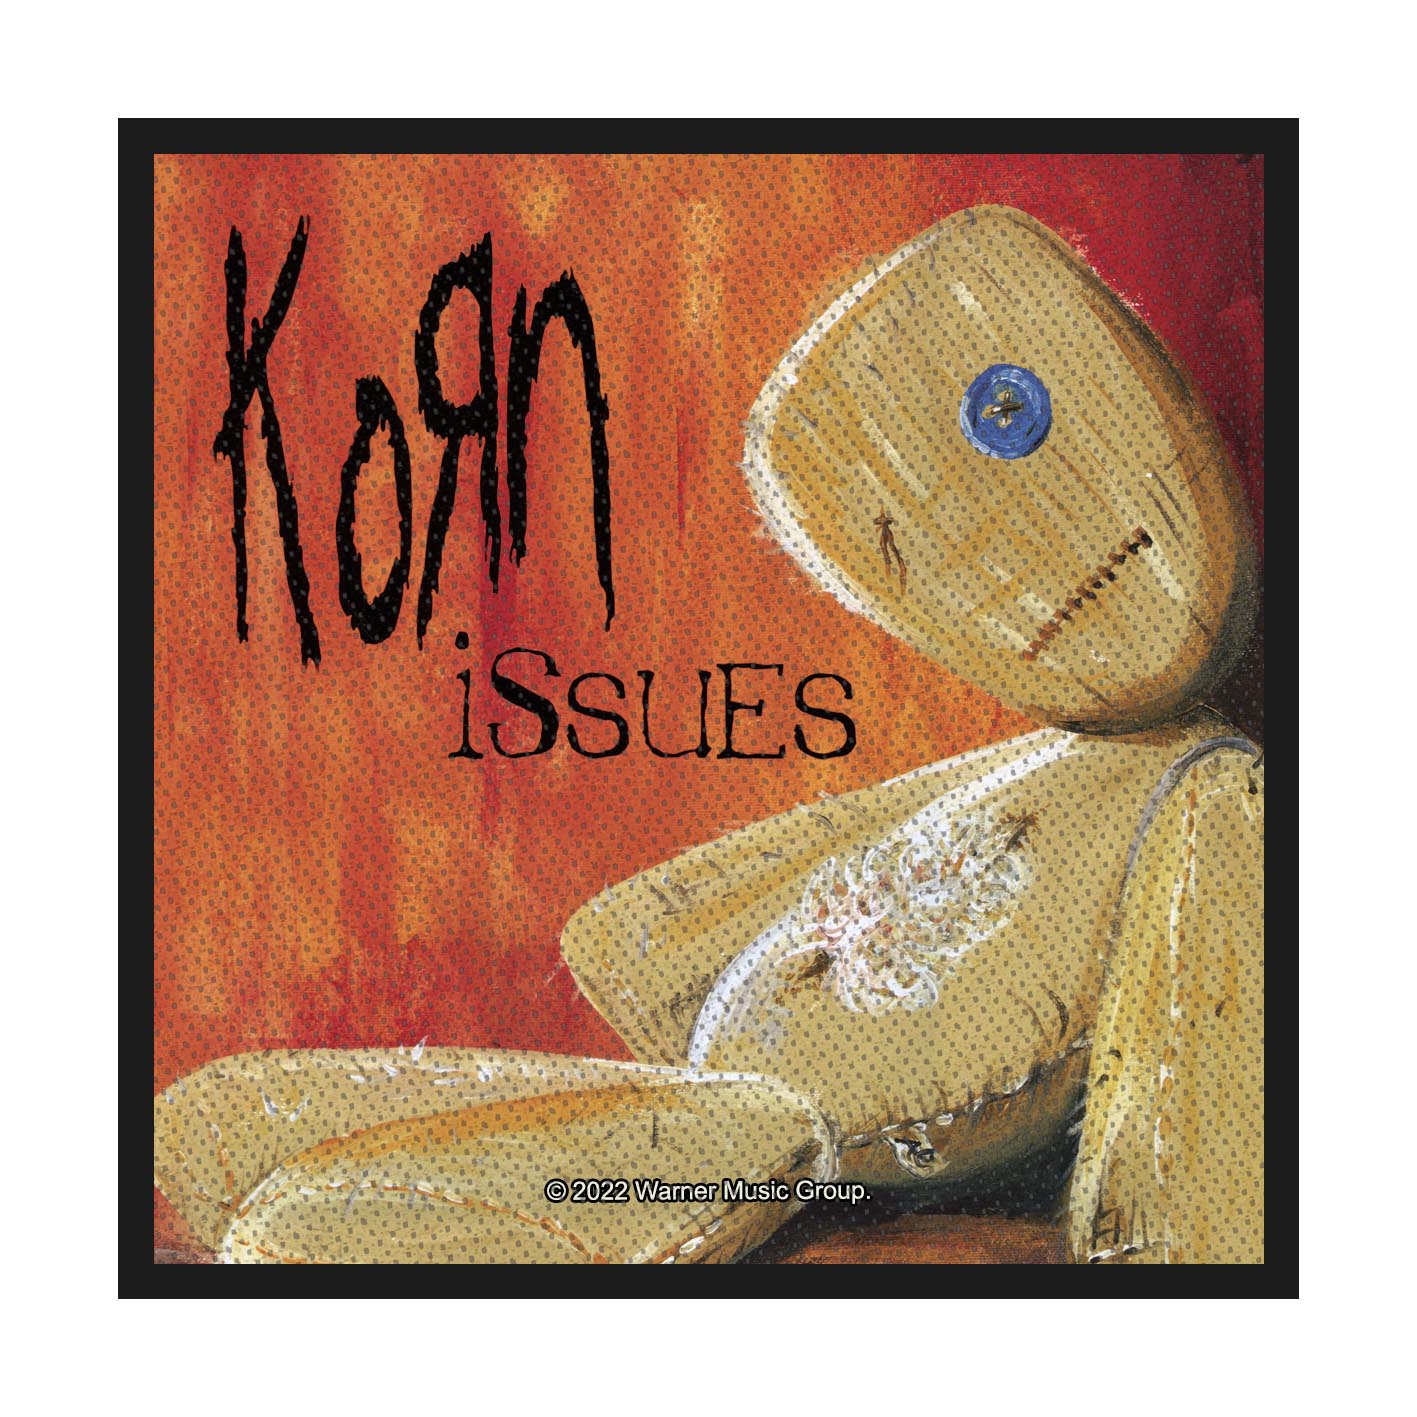 Korn 'Issues' Woven Patch - HMOL